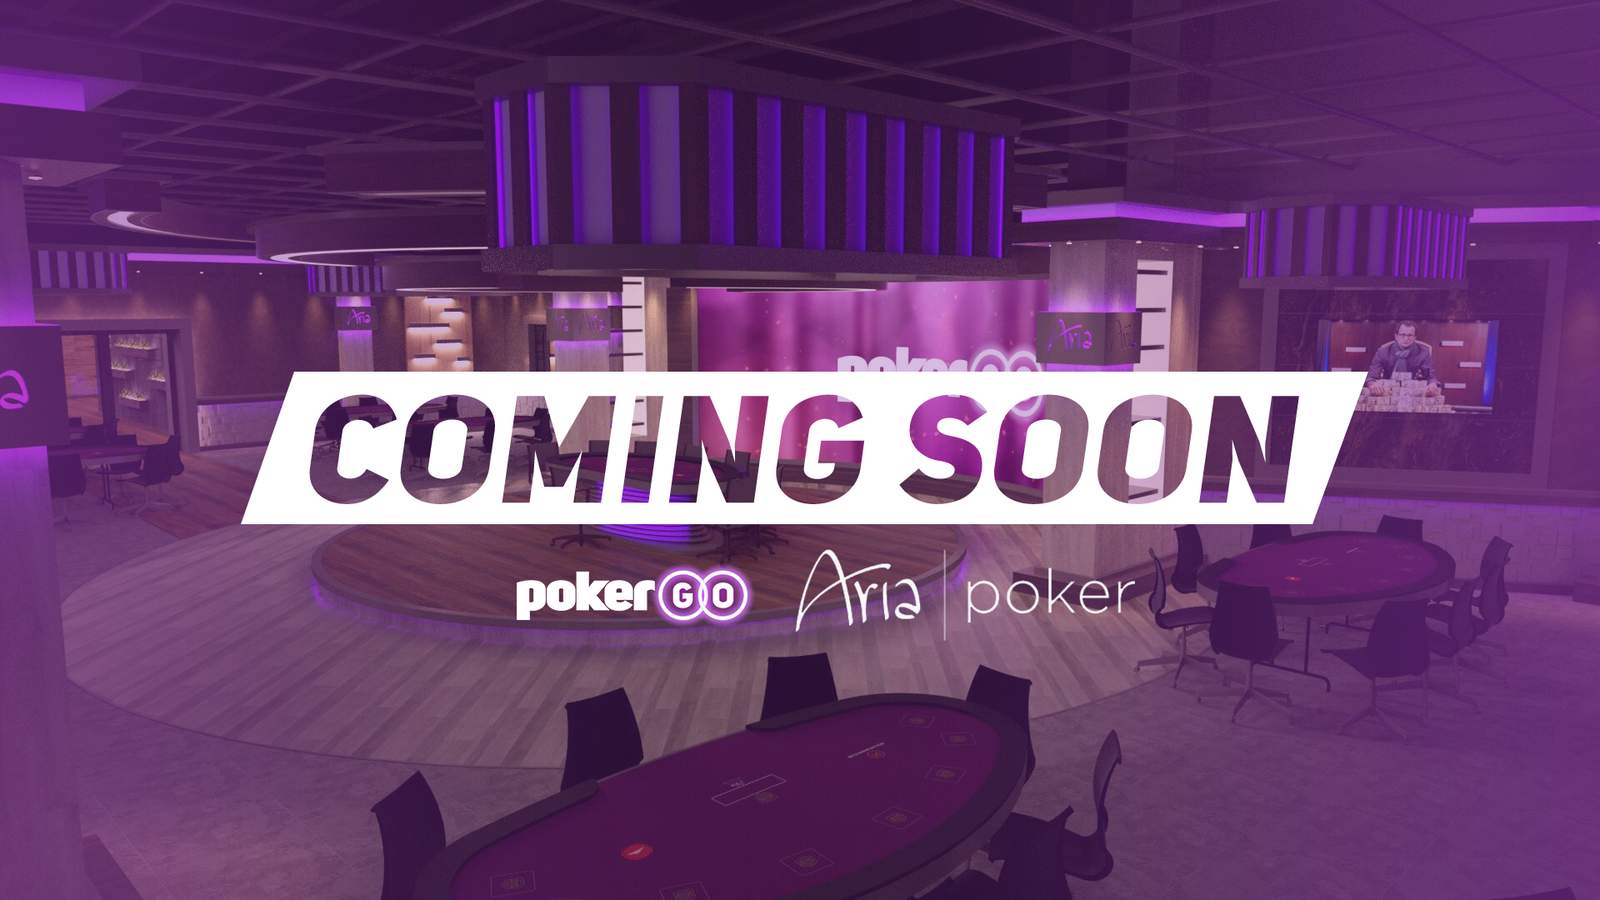 Poker Central Announces State-of-the-Art PokerGO Studio at ARIA